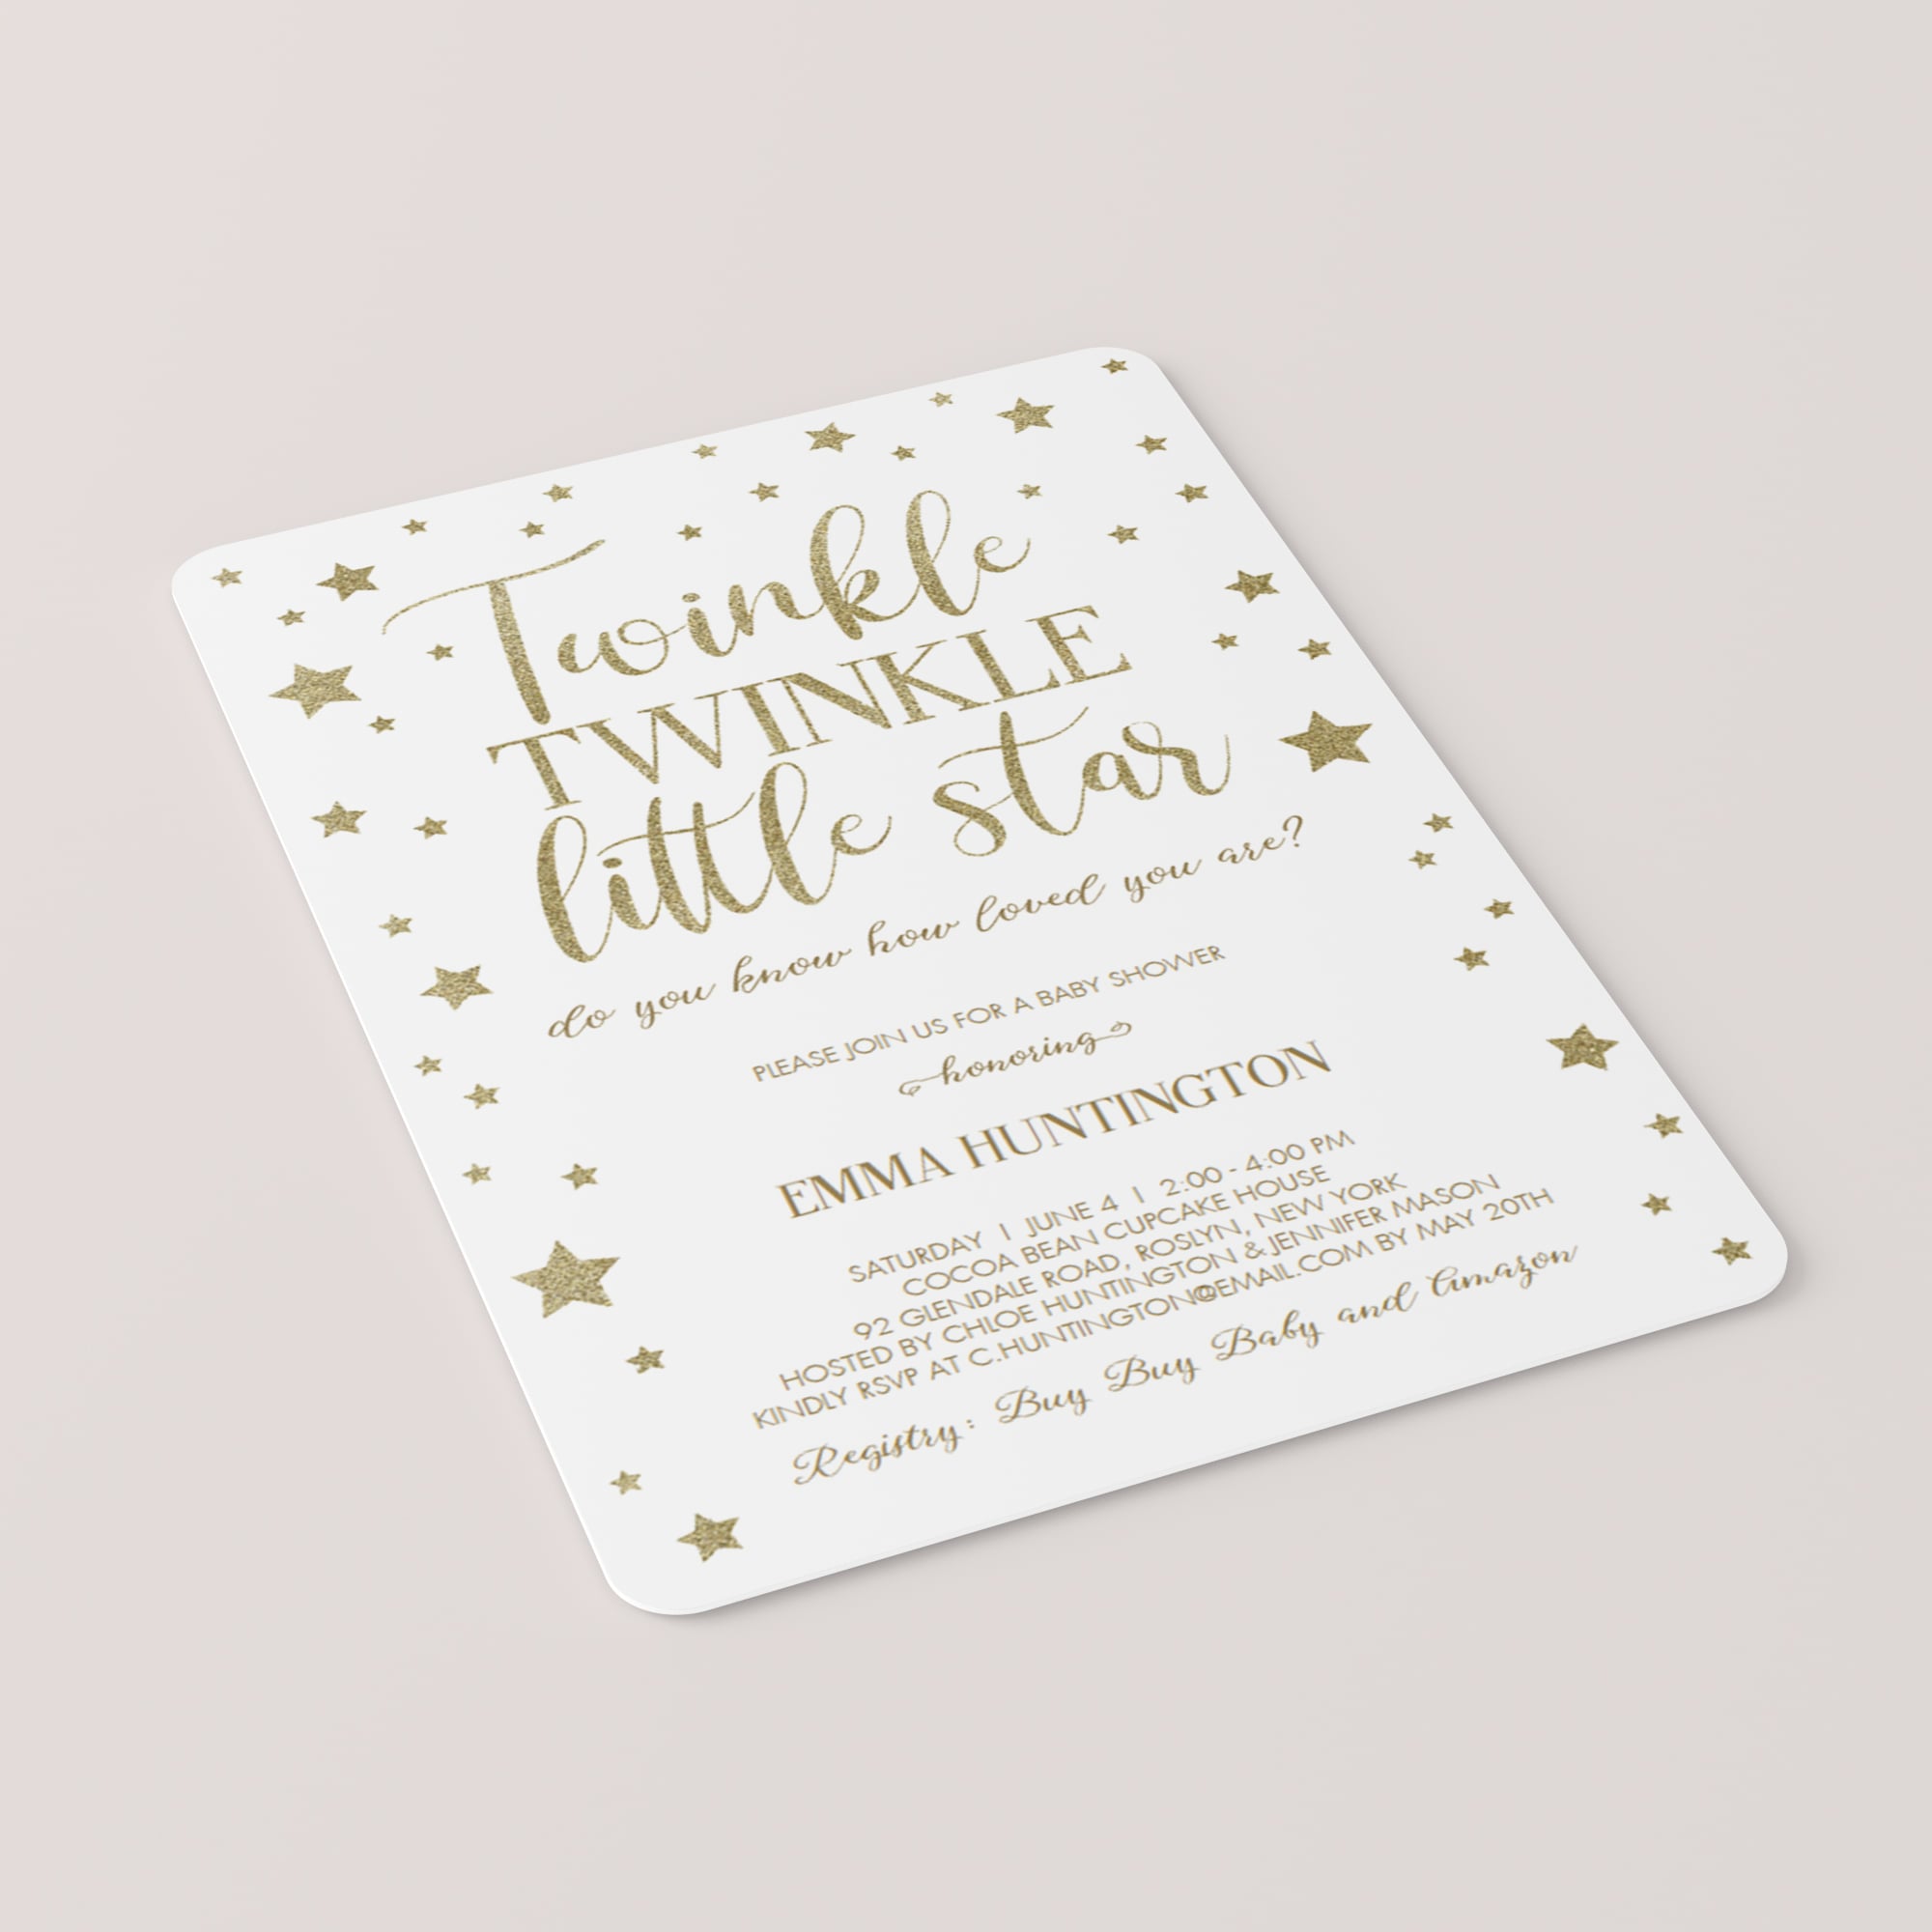 Twinkle Twinkle baby shower invite editable template by LittleSizzle